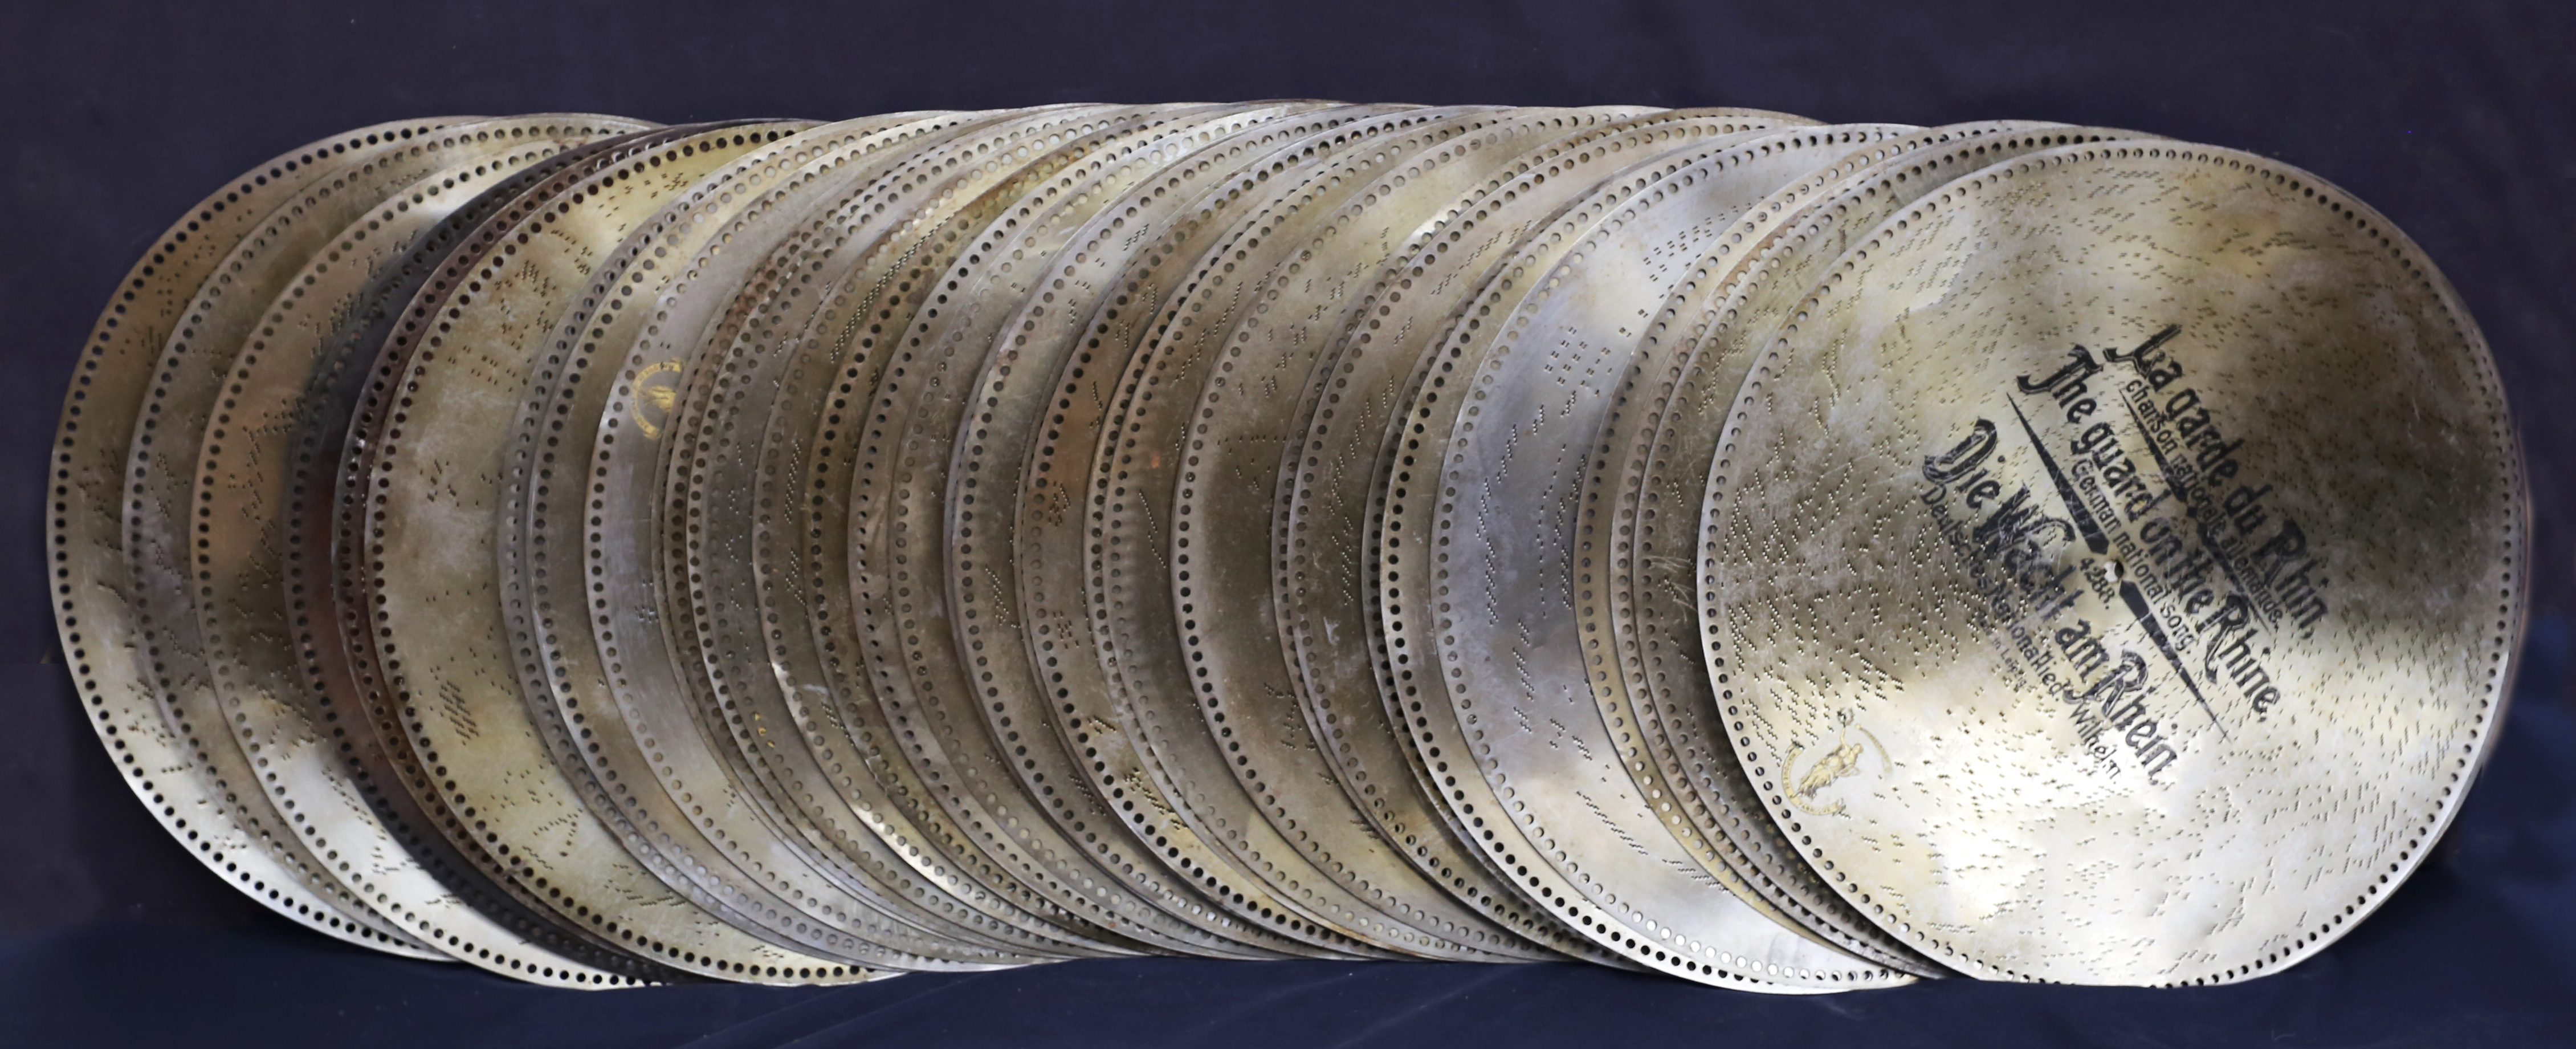 A 24 and a half inch Mikado Polyphon, Style 54, German, circa 1900. Approximately 65 discs are - Image 6 of 7